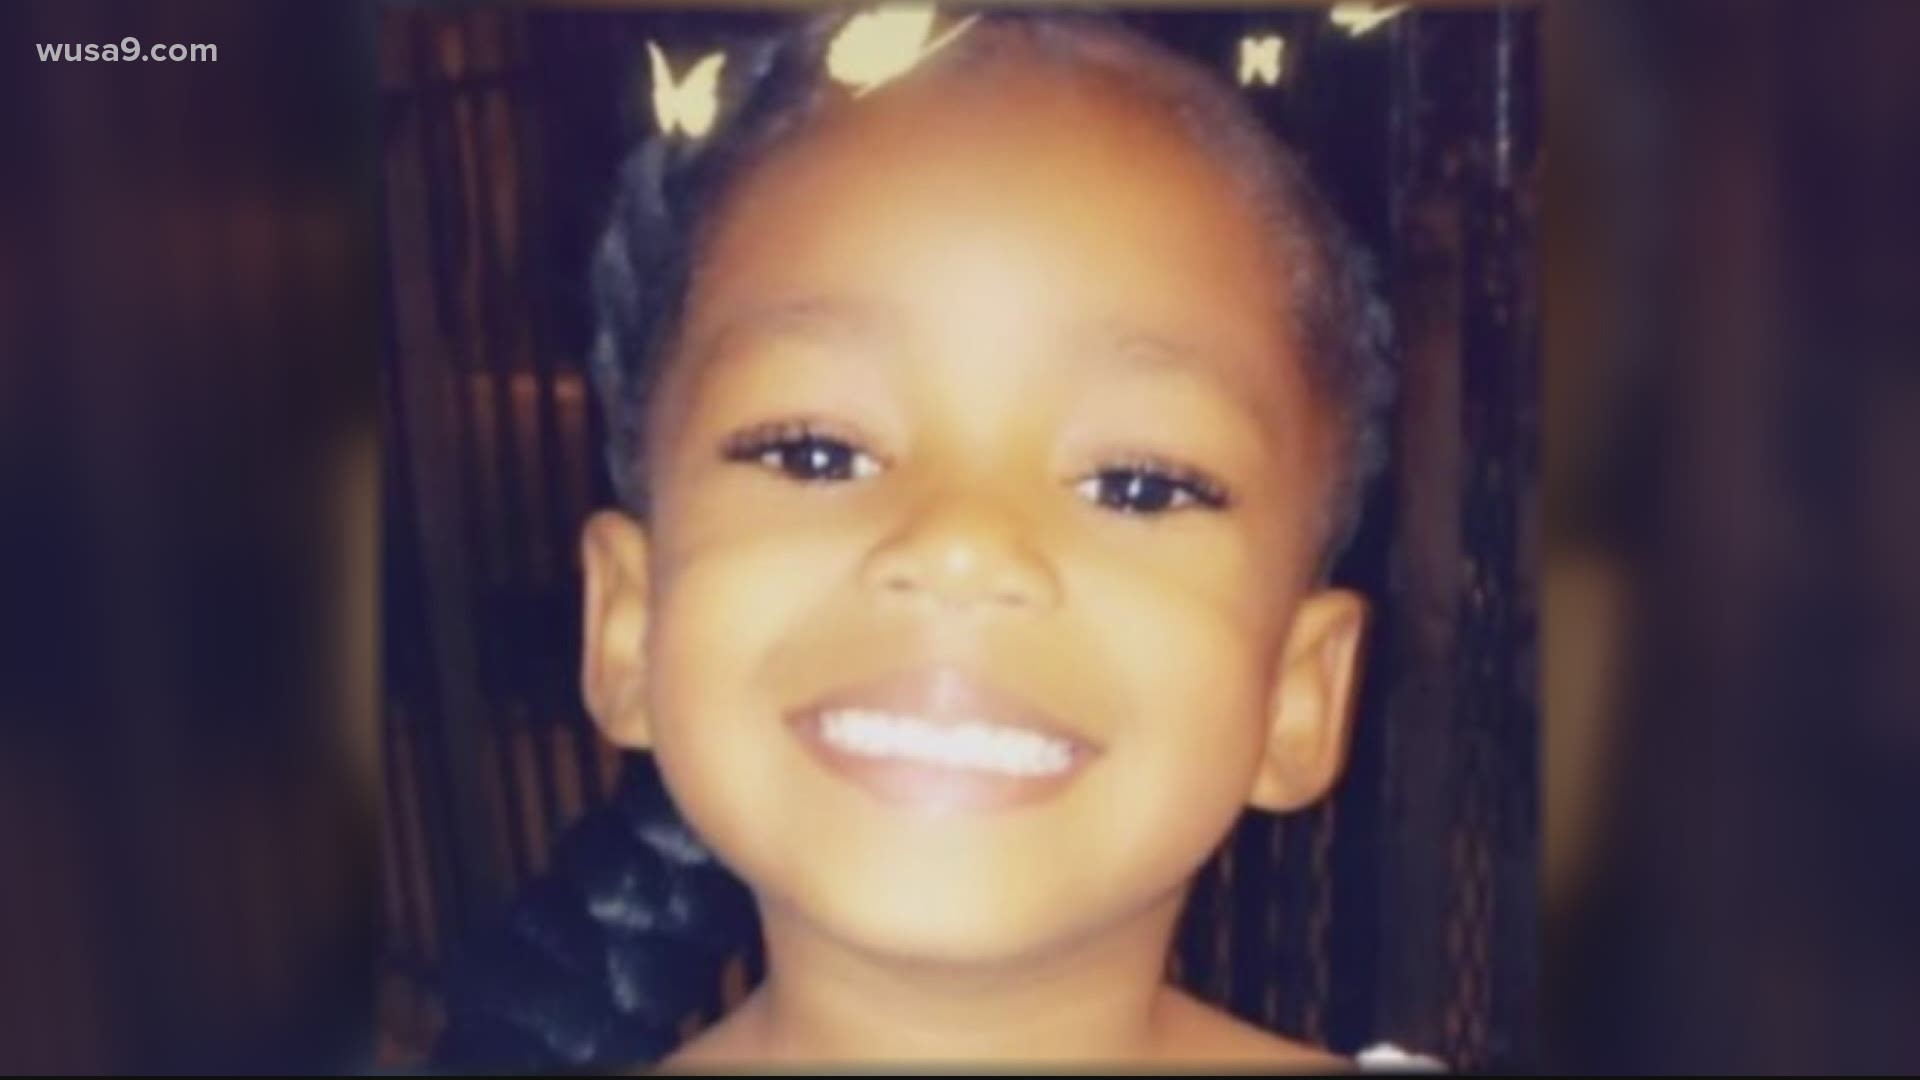 Family and community members are begging for help to get whoever killed Nyiah off the streets.